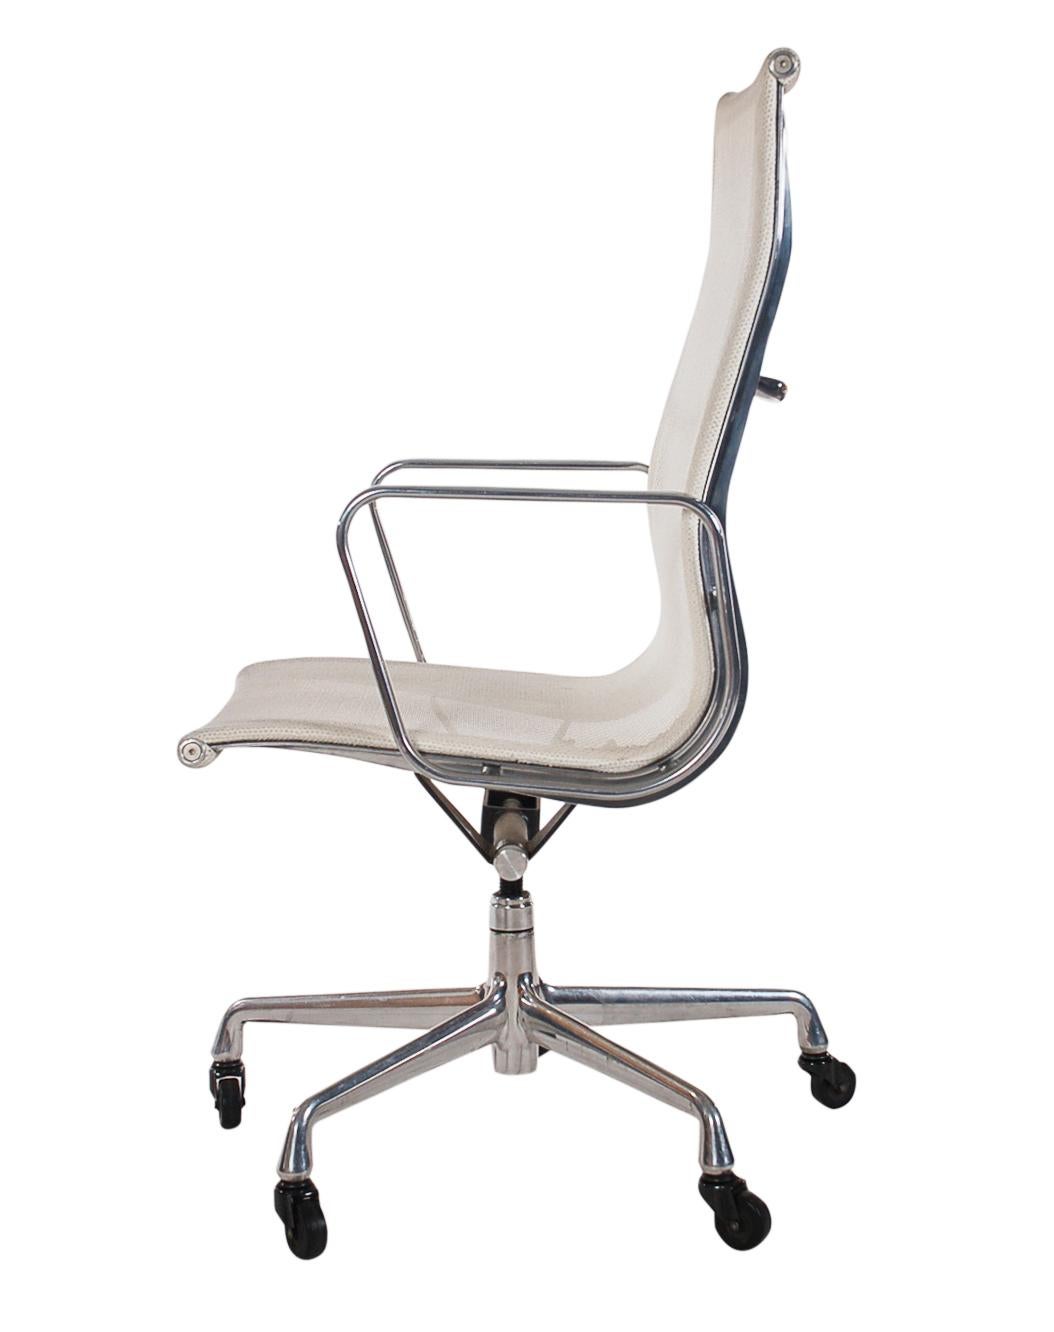 American Pair of Charles Eames for Herman Miller White Conference Room Office Chairs